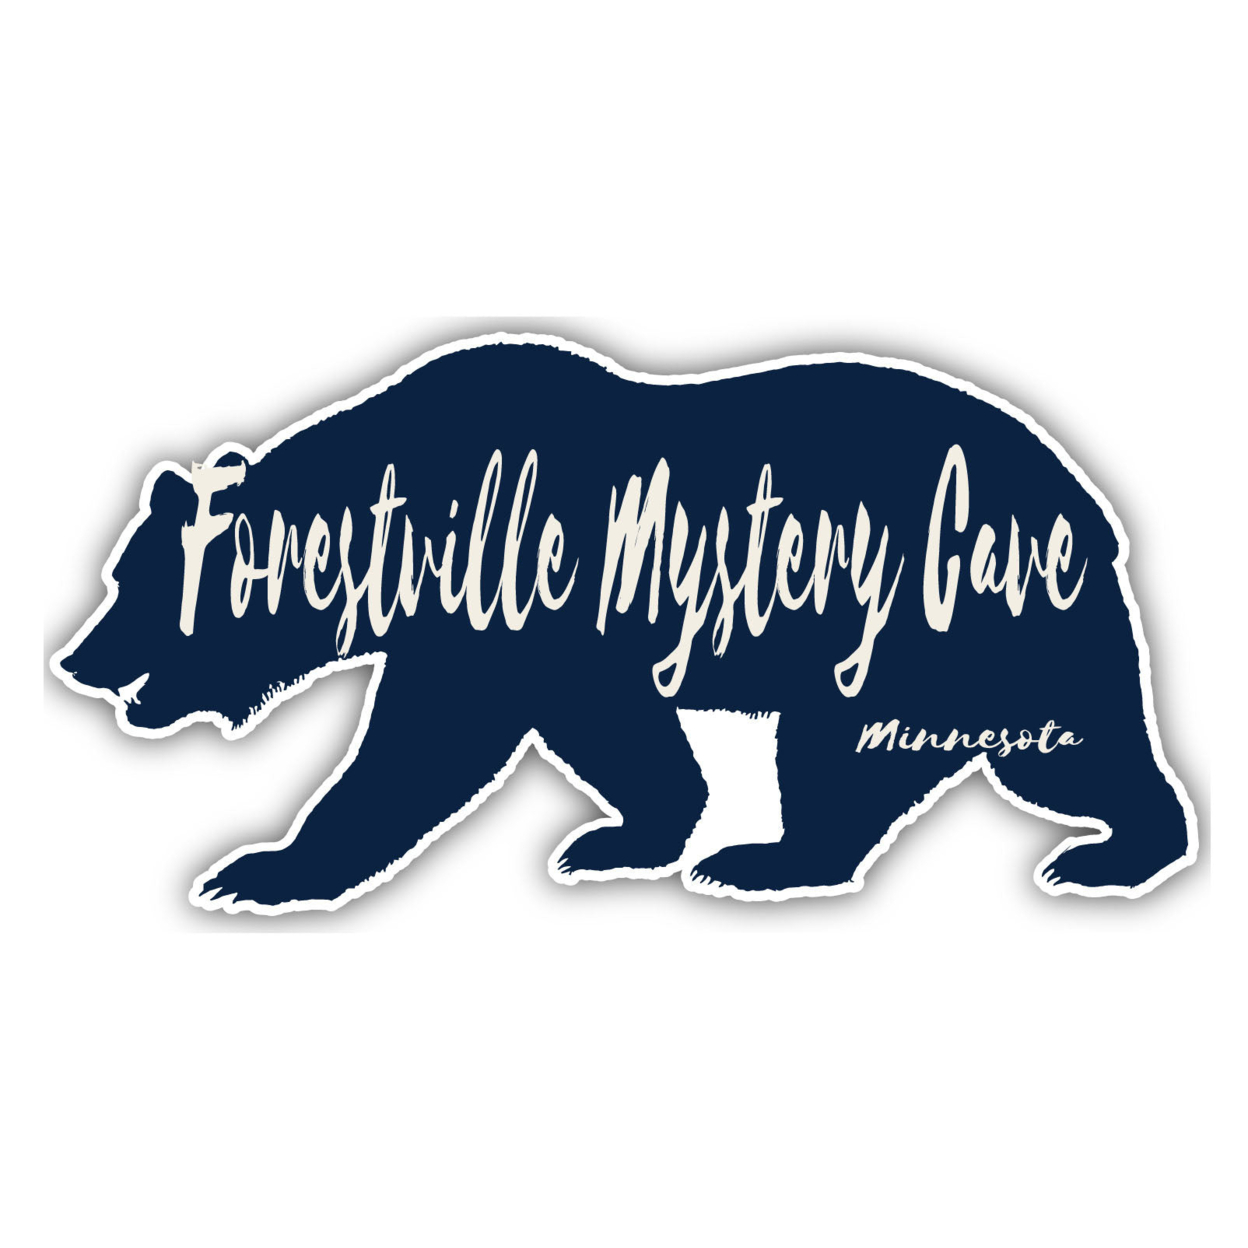 Forestville Mystery Cave Minnesota Souvenir Decorative Stickers (Choose Theme And Size) - 4-Pack, 10-Inch, Bear